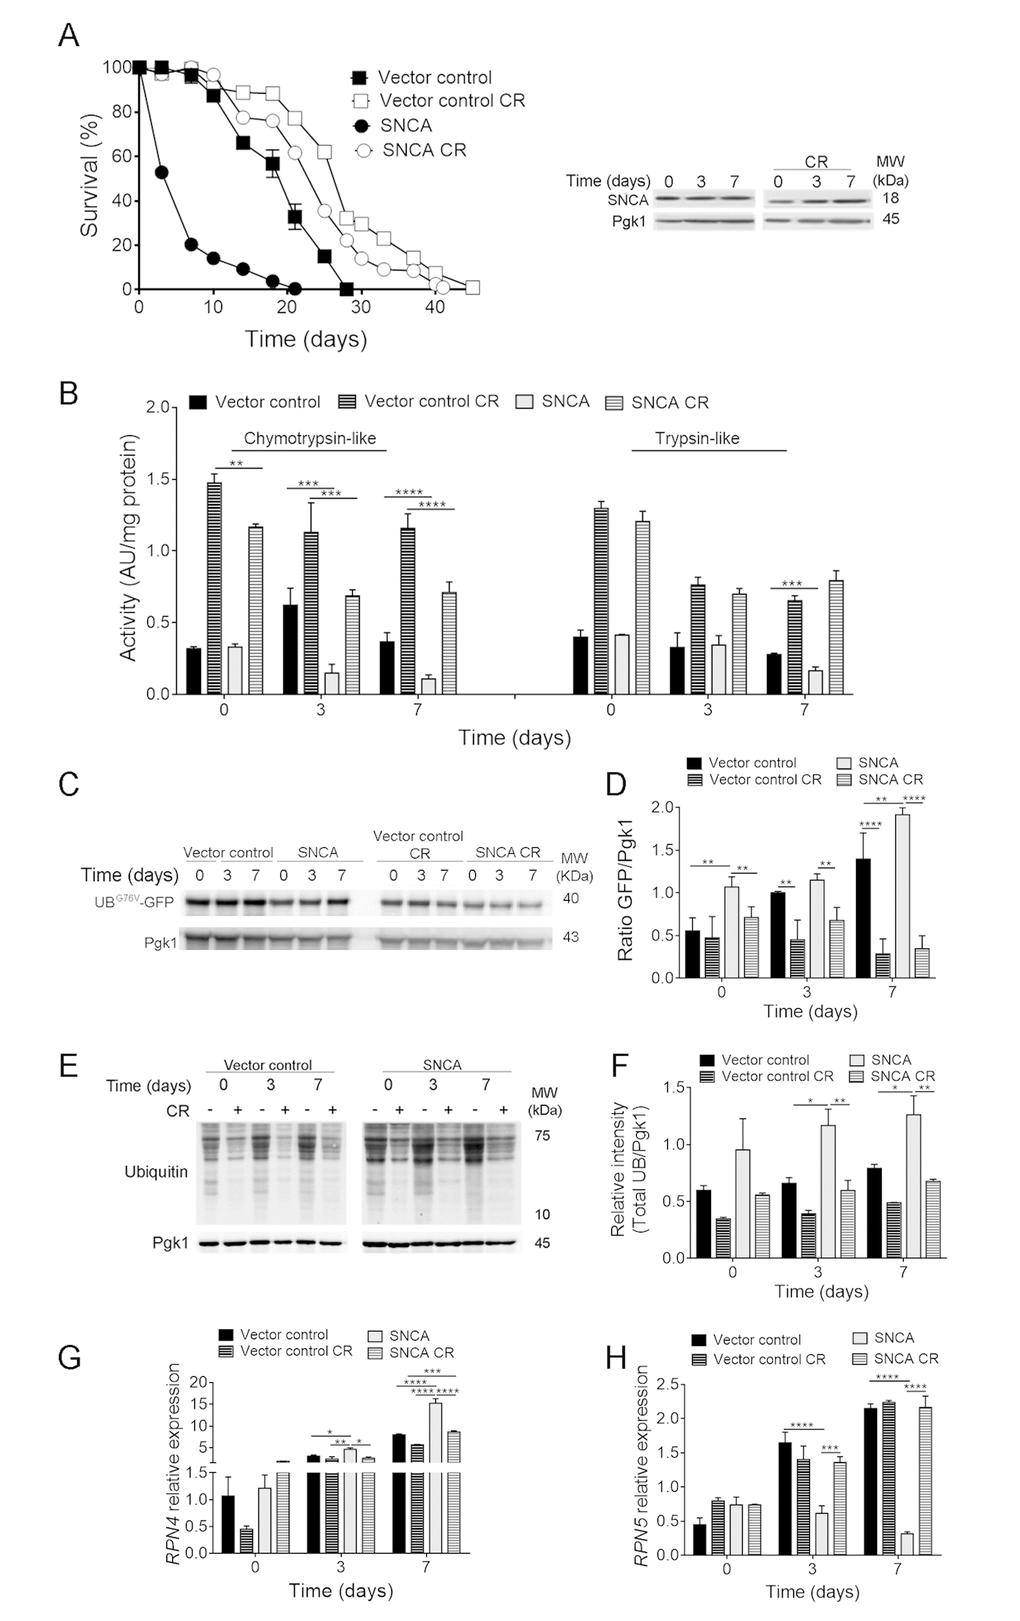 Caloric restriction abrogates α-synuclein (SNCA)-induced toxicity by upregulating ubiquitin-proteasome system activity. (A) Chronological lifespan (CLS) and SNCA levels of stationary wild type cells harbouring the vector control or expressing the human SNCA grown under regular (2% glucose) or CR (0.5% glucose) conditions. (B) Chymotrypsin- and trypsin like activities. The assay was normalized to the total protein amount. (C) UPS activity measured by monitoring the ubiquitin/proteasome-dependent proteolysis of the short-lived protein UBG76V-GFP. GFP was detected by Western blotting using a GFP-specific antibody. (D) Graphical representation of GFP/Pgk1 obtained by densitometric analysis. (E) Ubiquitination profile determined by Western blotting using an anti-mono and polyubiquitination antibody. (F) Graphical representation of the intensity of total UB/Pgk1 obtained by densitometric analysis. (G) RPN4 and (H) RPN5 mRNA relative expression levels. Three reference genes (ACT1-actin, PDA1-alpha subunit of pyruvate dehydrogenase and TDH2-isoform 2 of glyceraldehyde-3-phosphate dehydrogenase) were used as internal standards and for the normalization of mRNA expression levels. Significance was determined by two-way ANOVA (*p≤0.05, **p≤0.01, ***p≤0.001, ****p≤0.0001) between cells grown under regular or CR conditions expressing vector control or SNCA. Data represents mean ± SEM of at least three biological independent replicas. The error bars represent the standard error of the mean (SEM).